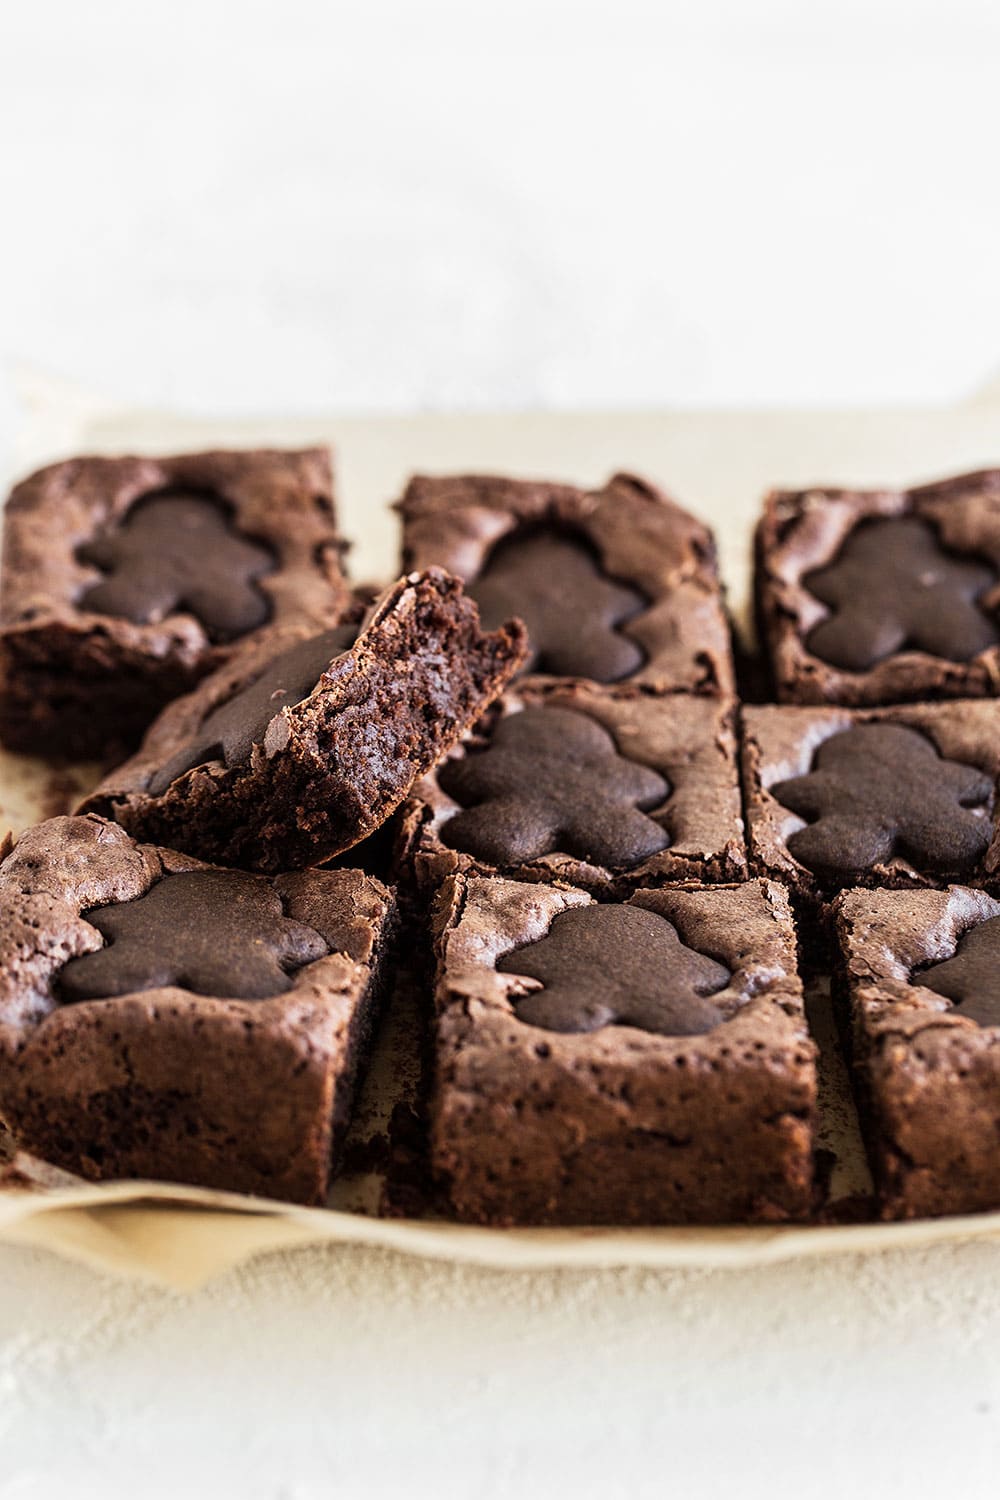 Spiced gingerbread brownies feature a fudgy brownie loaded with homemade gingerbread cookies